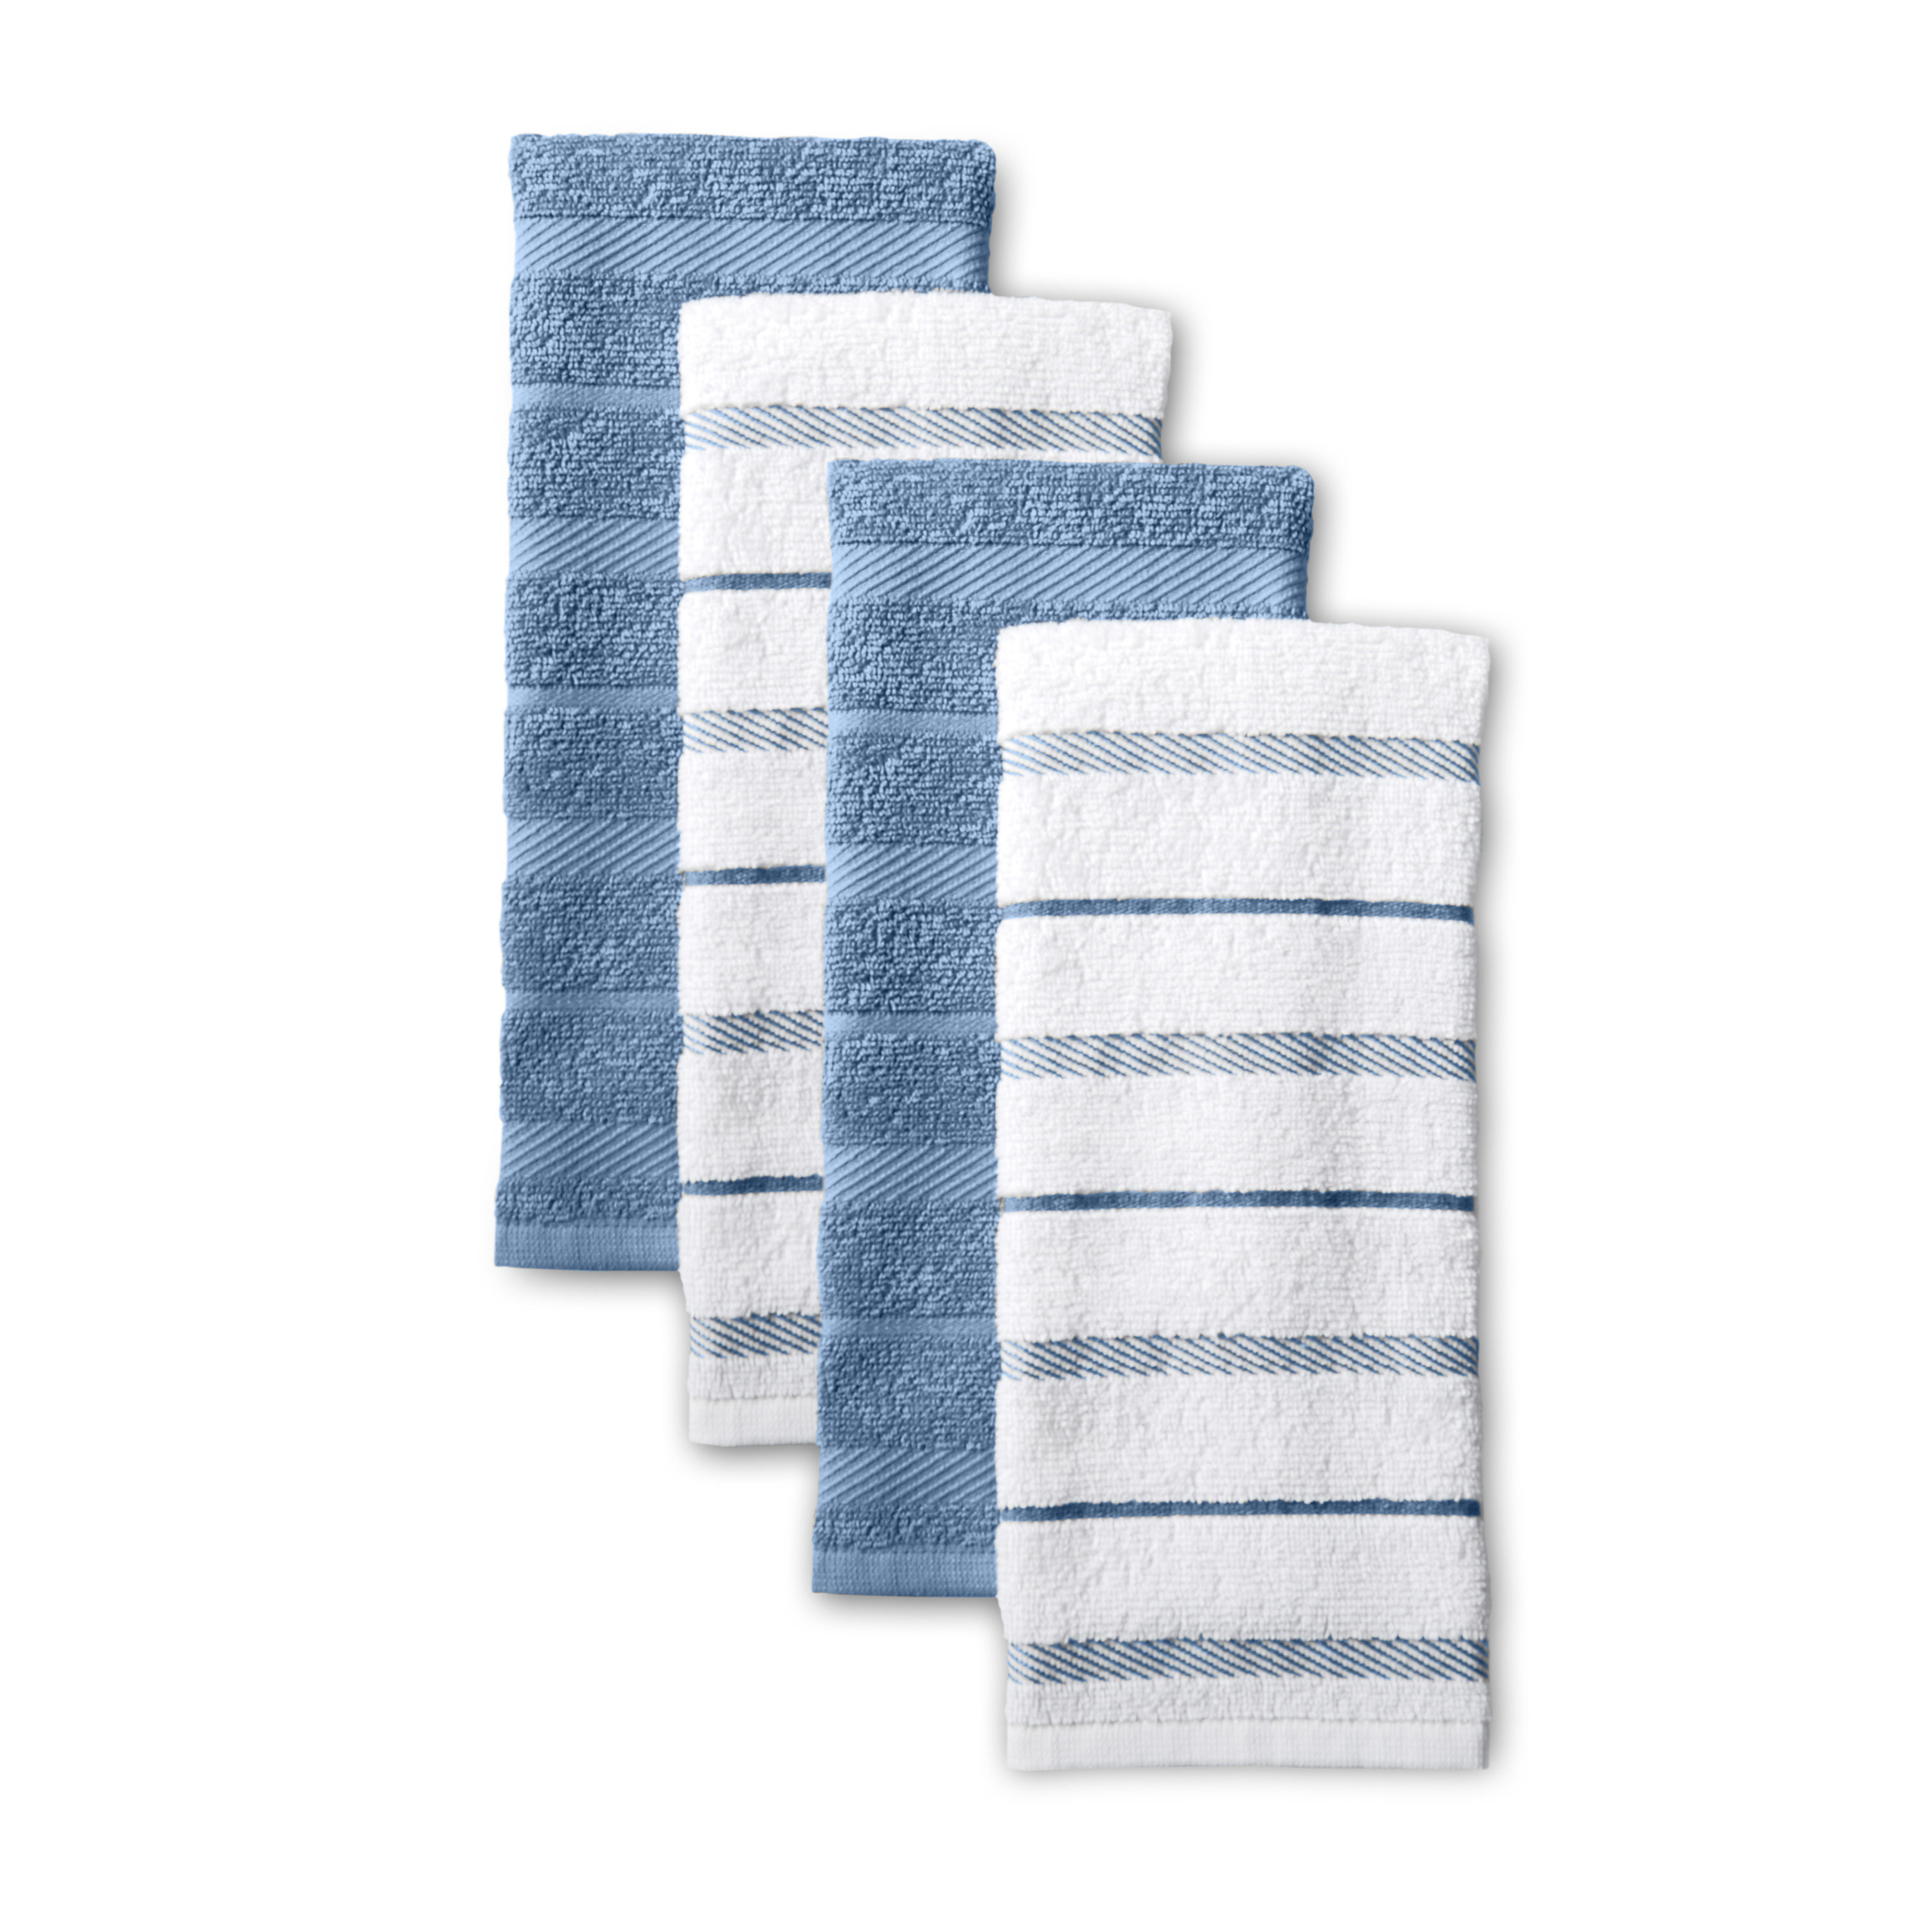 KitchenAid Towels (31 products) compare price now »